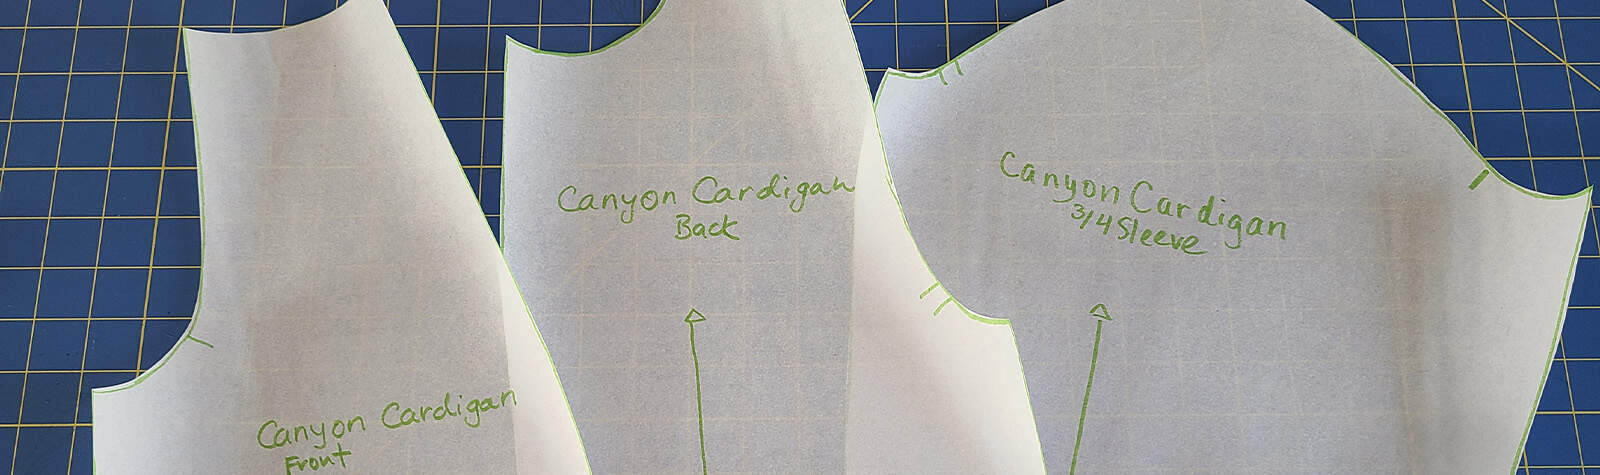 Three ways to crop a cardigan with Canyon